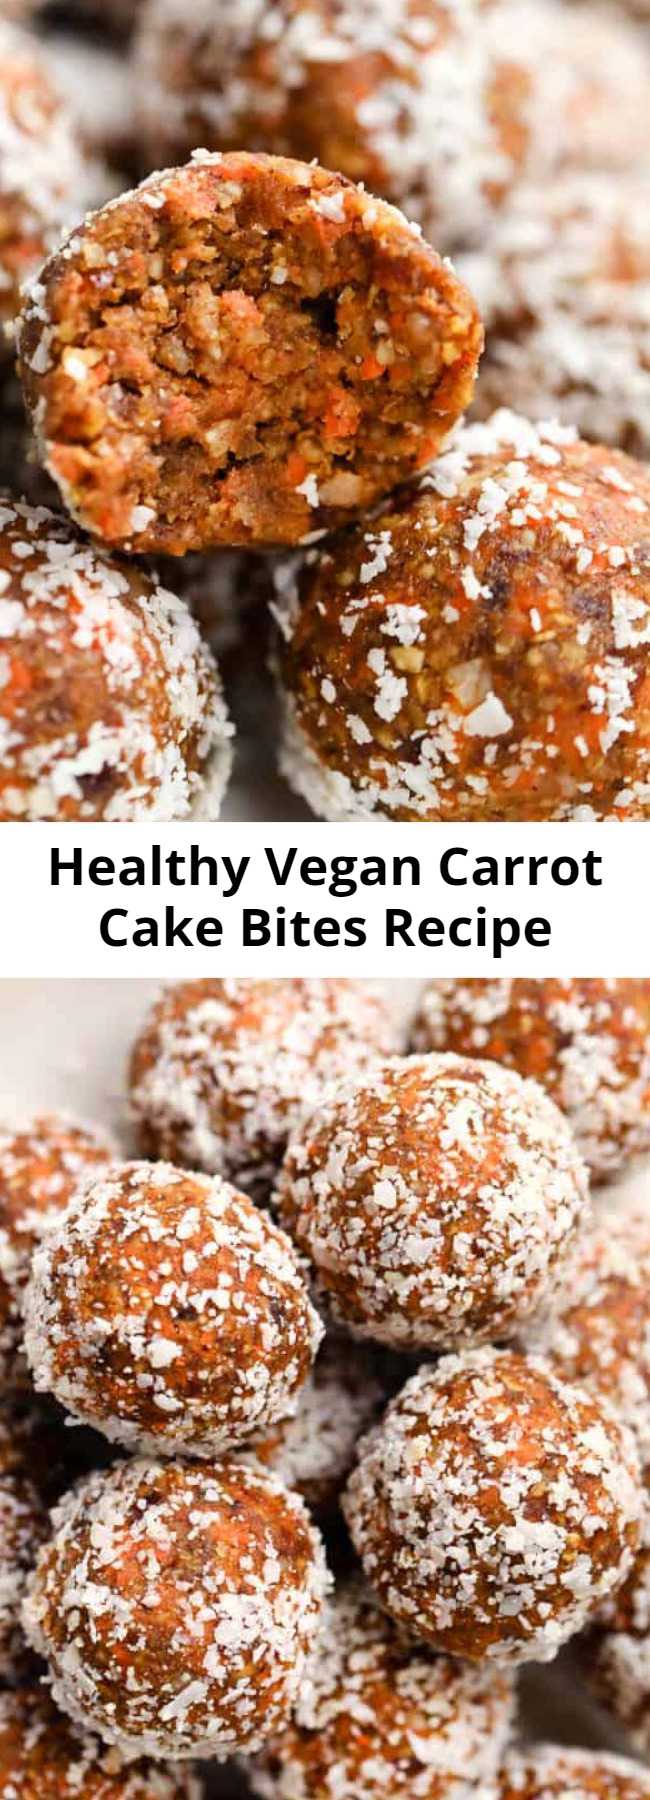 Healthy Vegan Carrot Cake Bites Recipe - These healthy carrot cake bites remind you of an indulgent slice of cake, but are actually good for you! They're vegan, no-bake and seriously delicious! #energybite #carrotcake #healthysnack